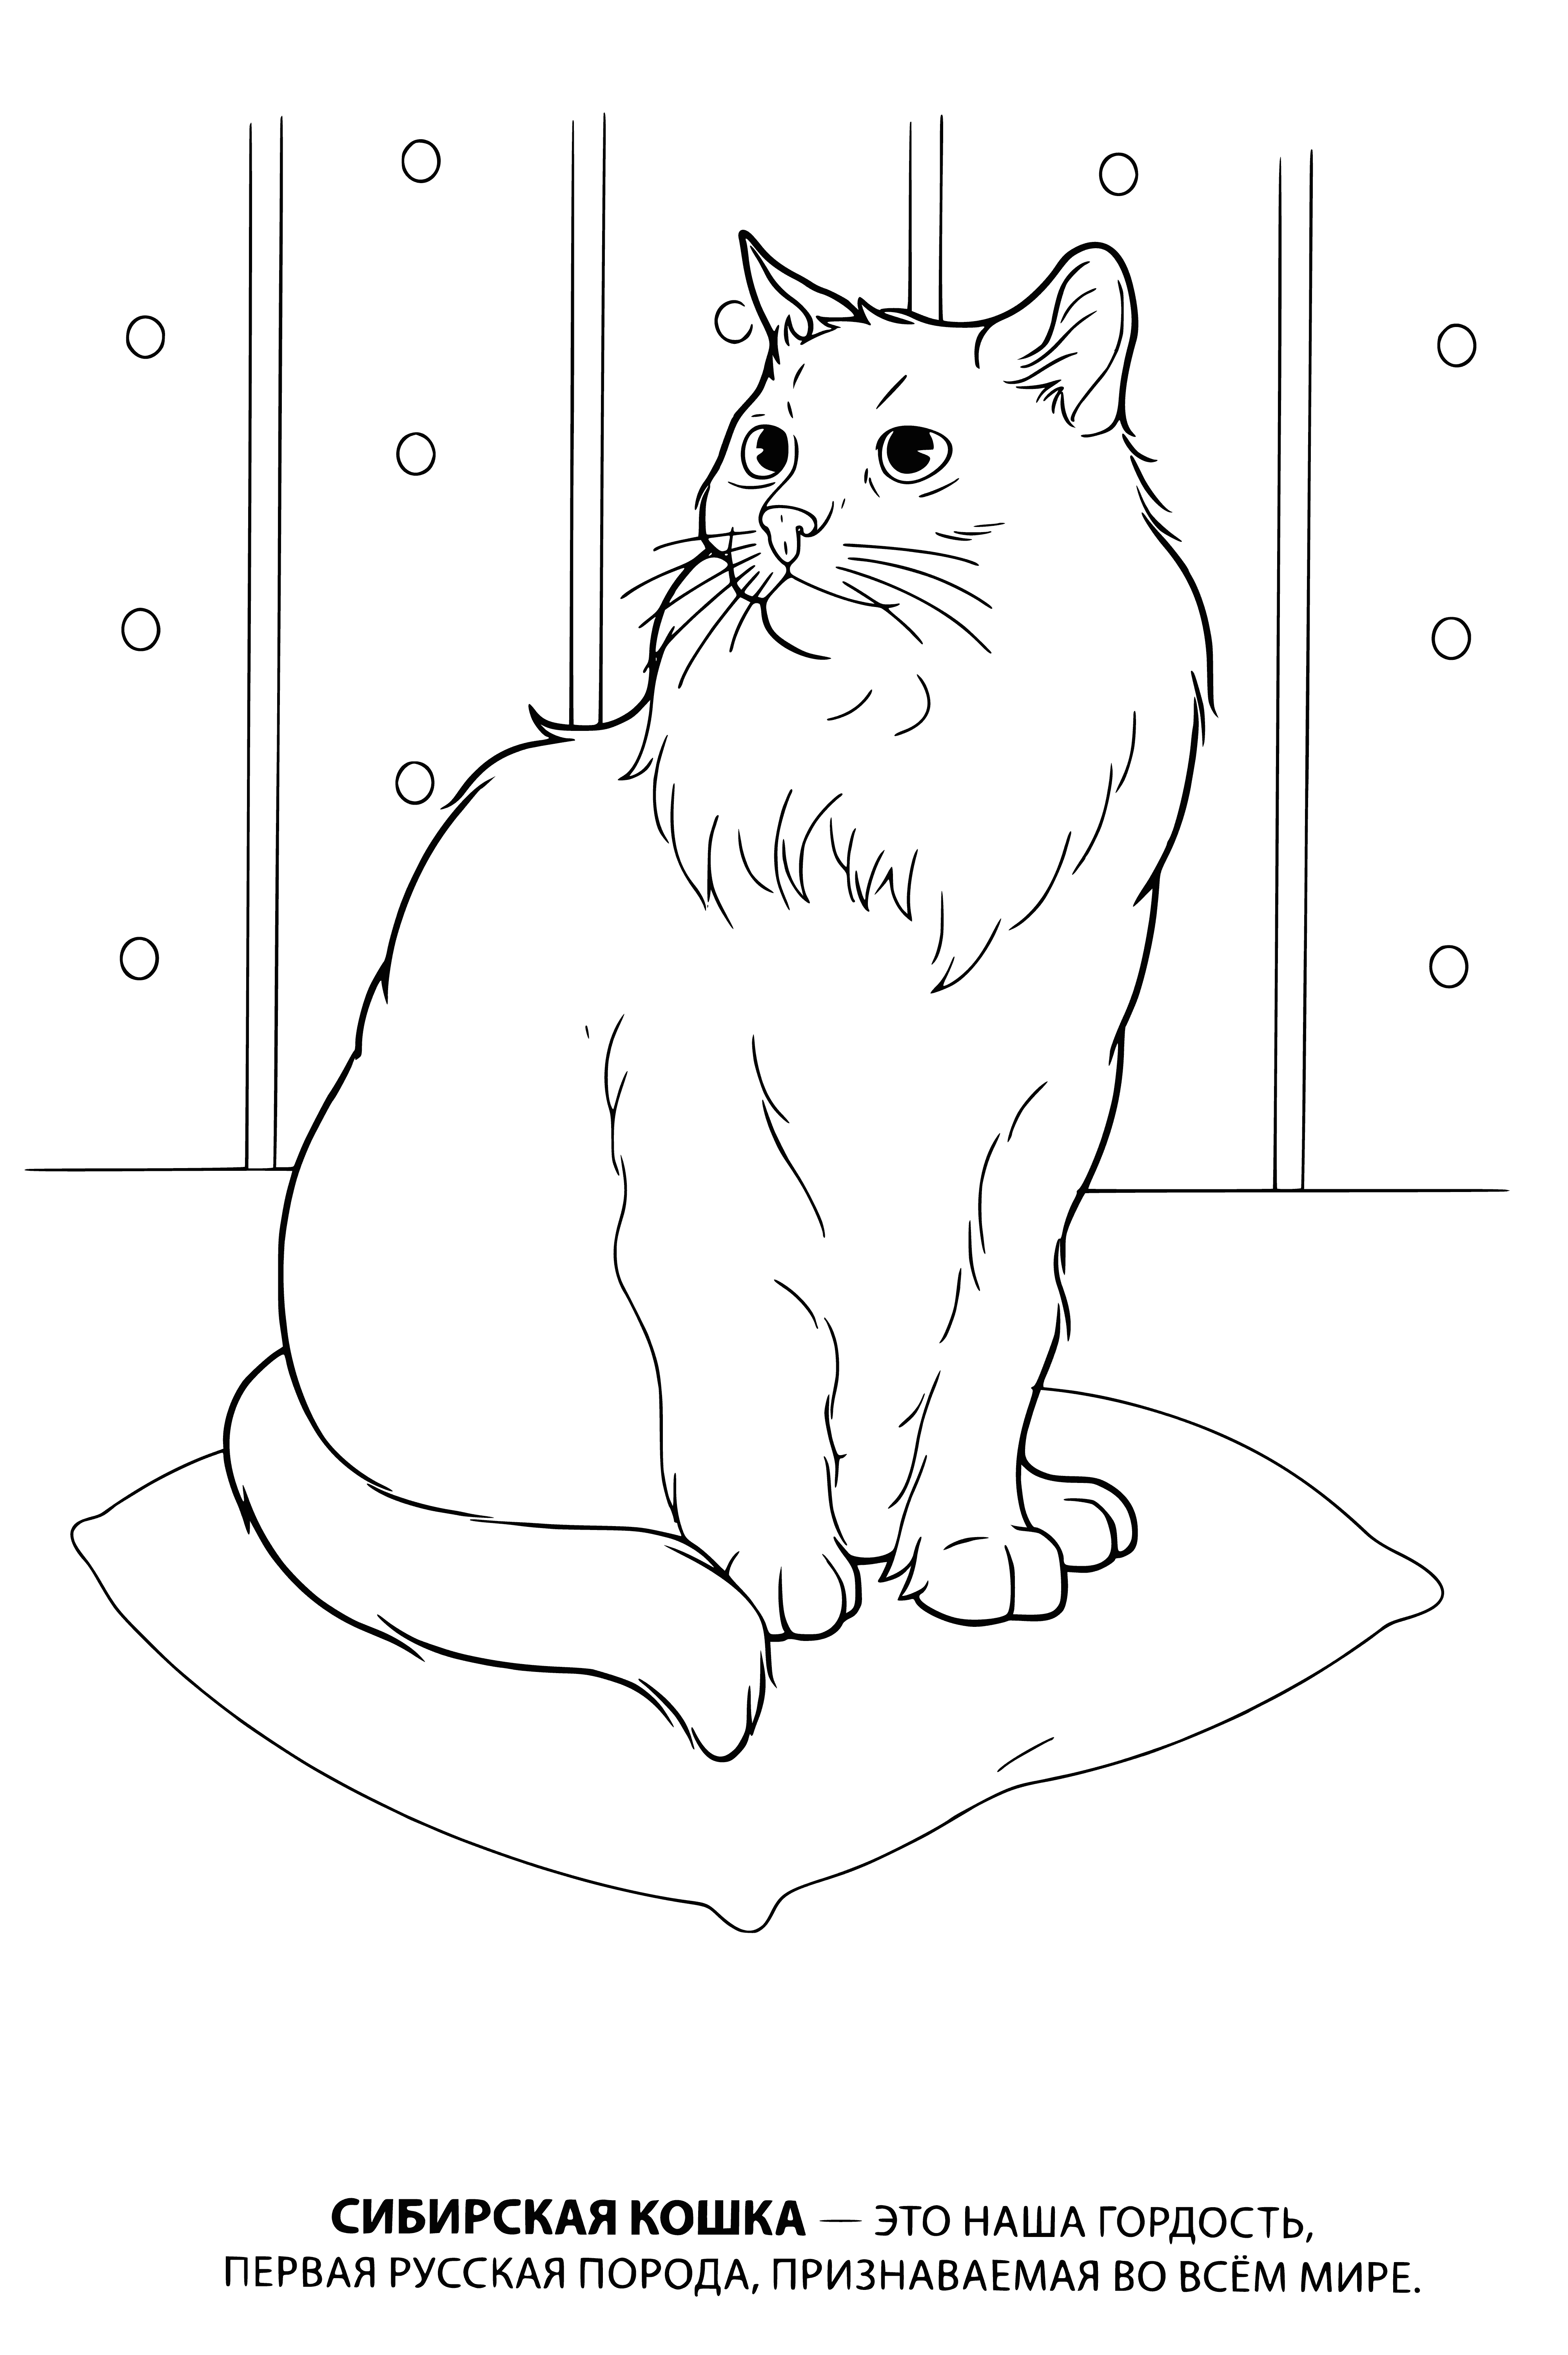 Siberian cat coloring page